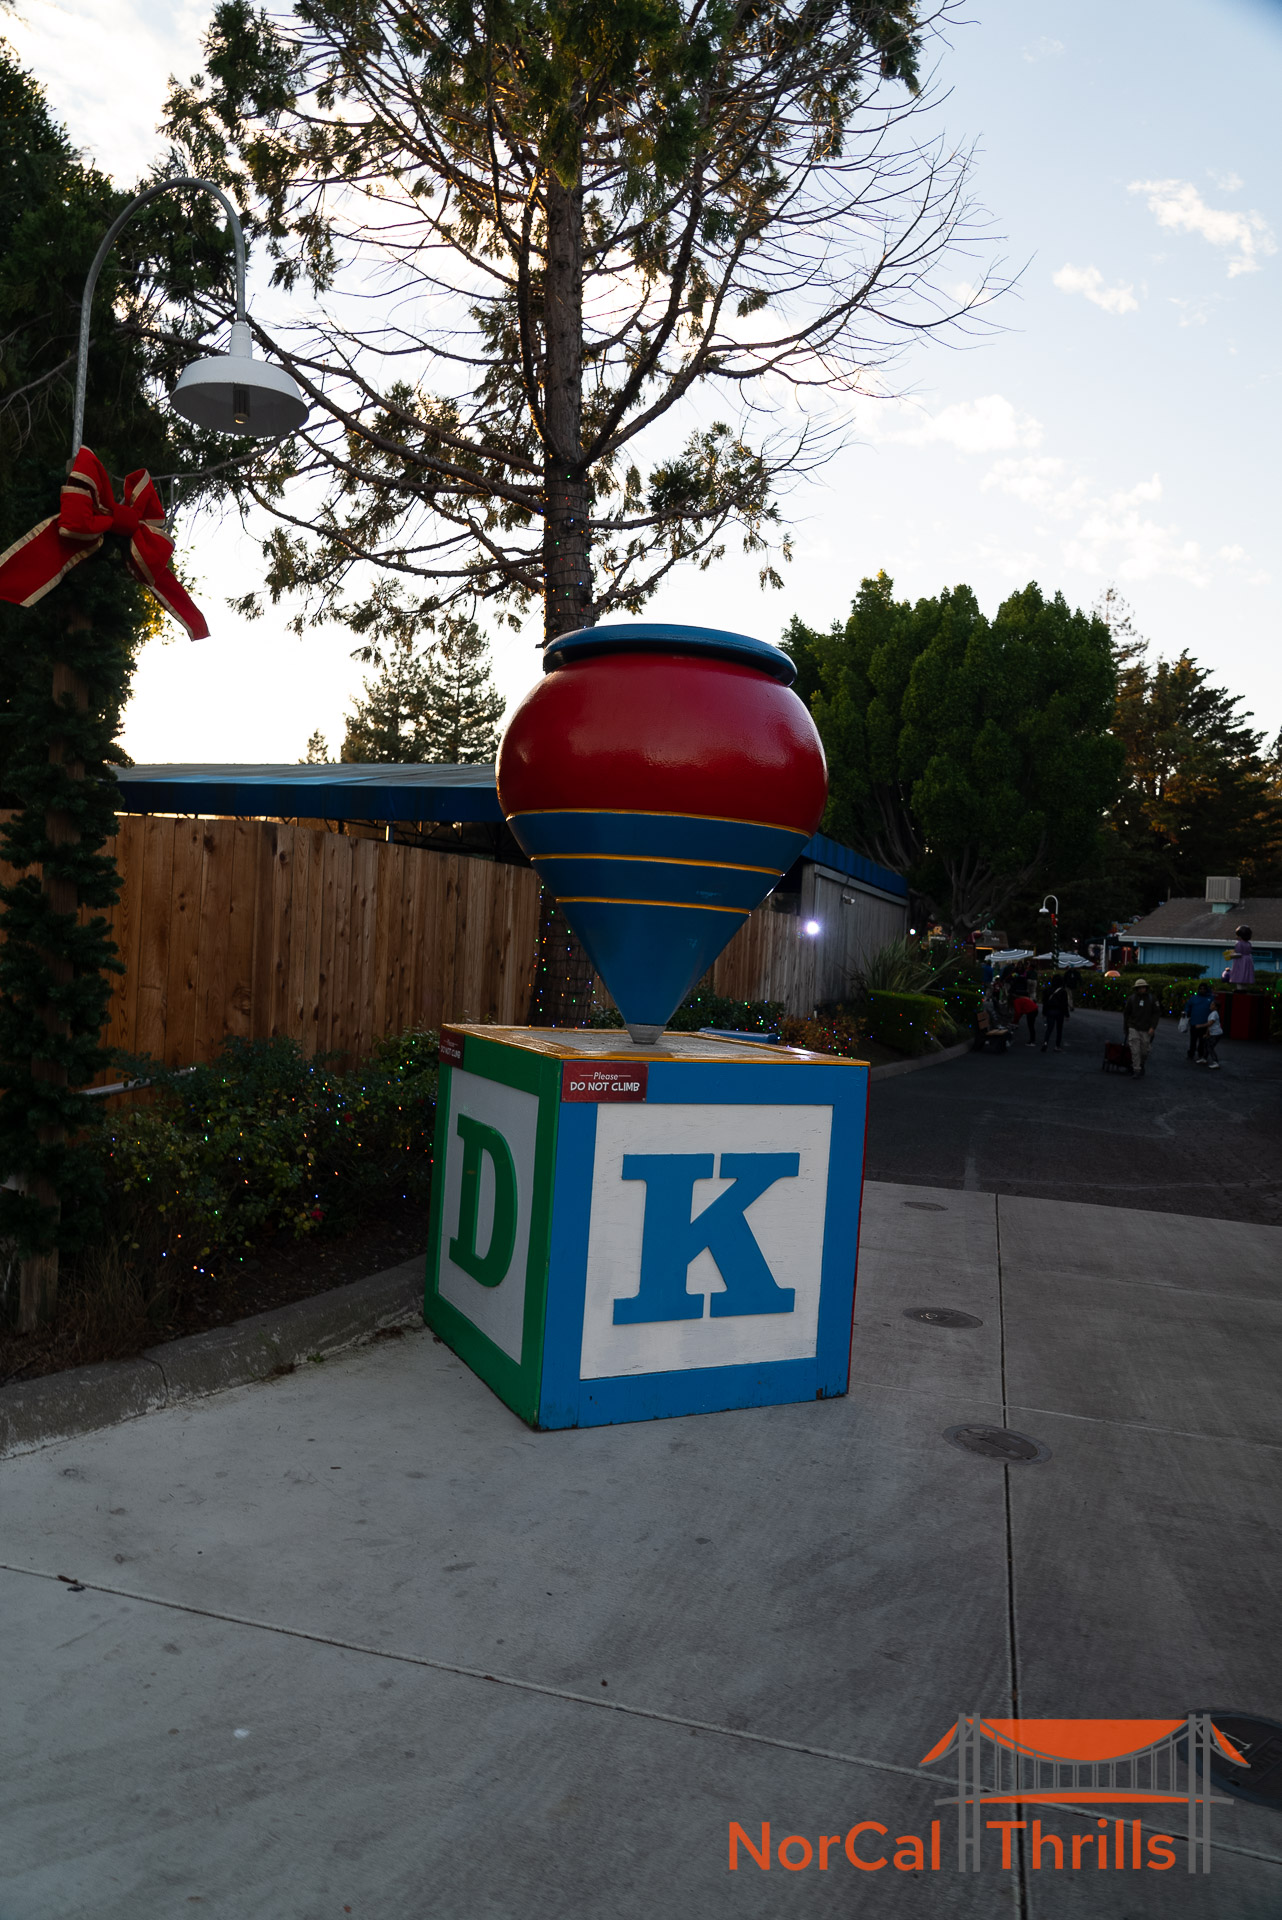 Holiday in the Park | Santa's Toy Land